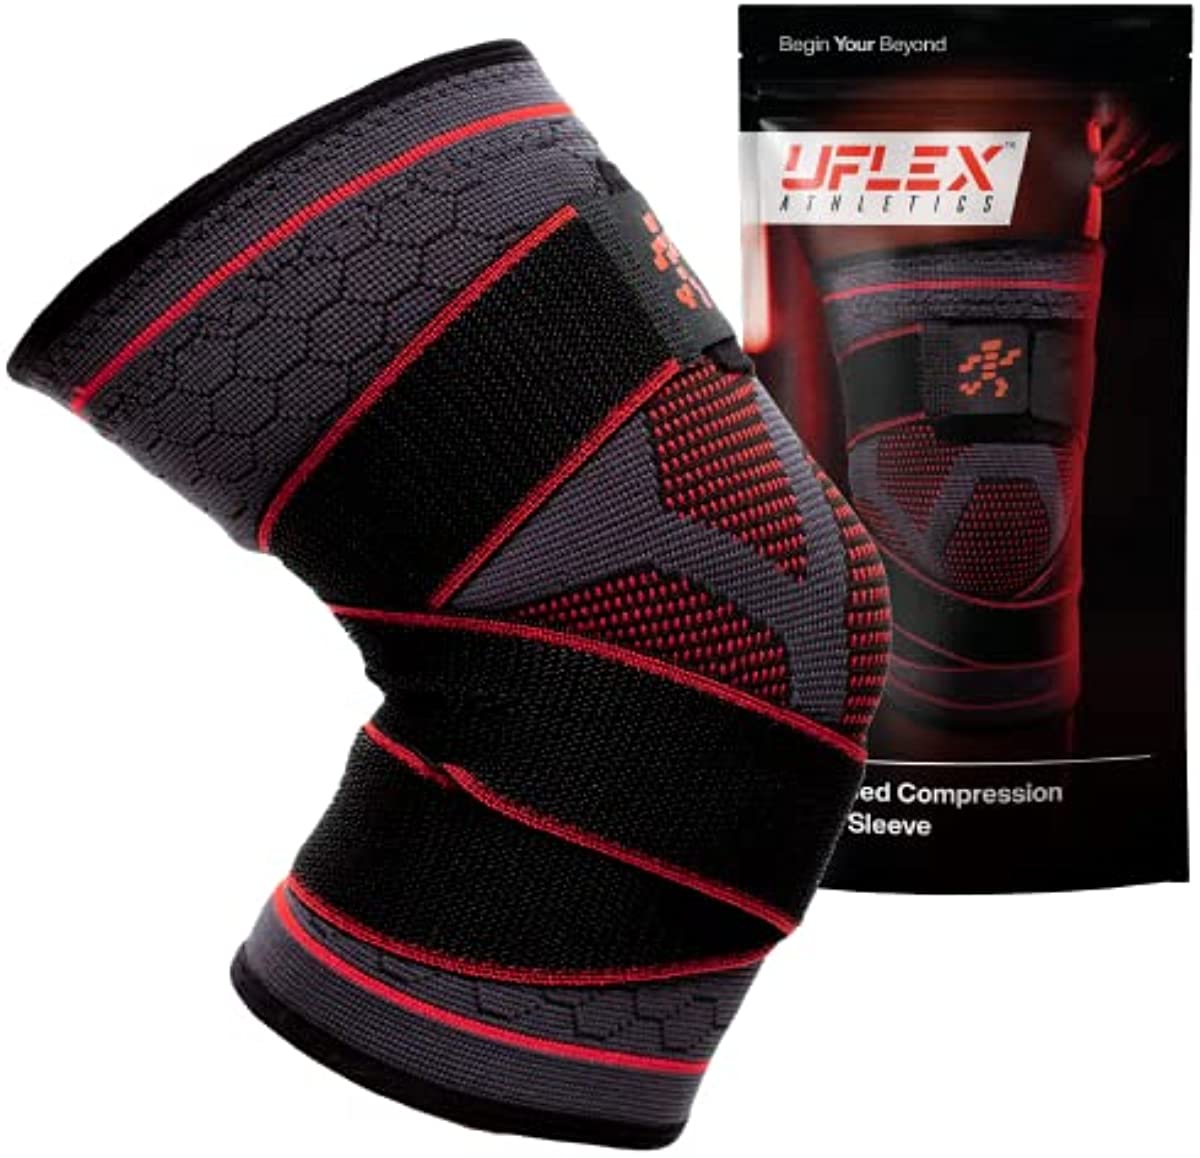 UFlex Knee Brace Compression Sleeve with Straps, Non Slip Running and Sports Support Braces for Men and Women, Sports Safety in Basketball, Tennis - Pain & Discomfort Related to Meniscus Tear (Medium, 2 Pack)